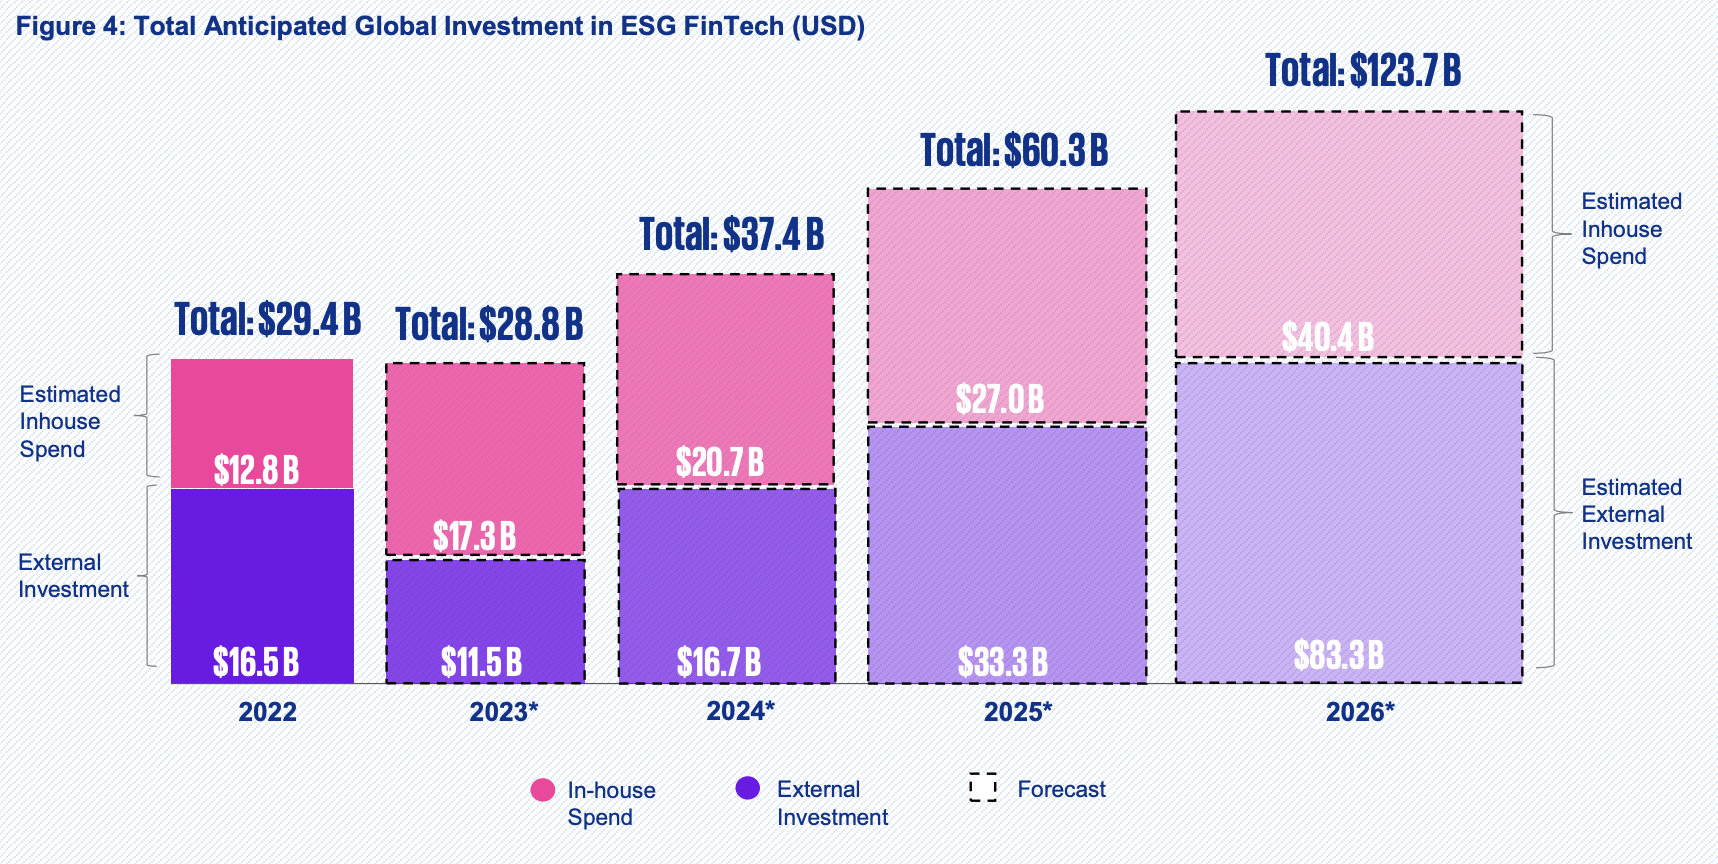 Total Anticipated Global Investment in ESG fintech (US$)